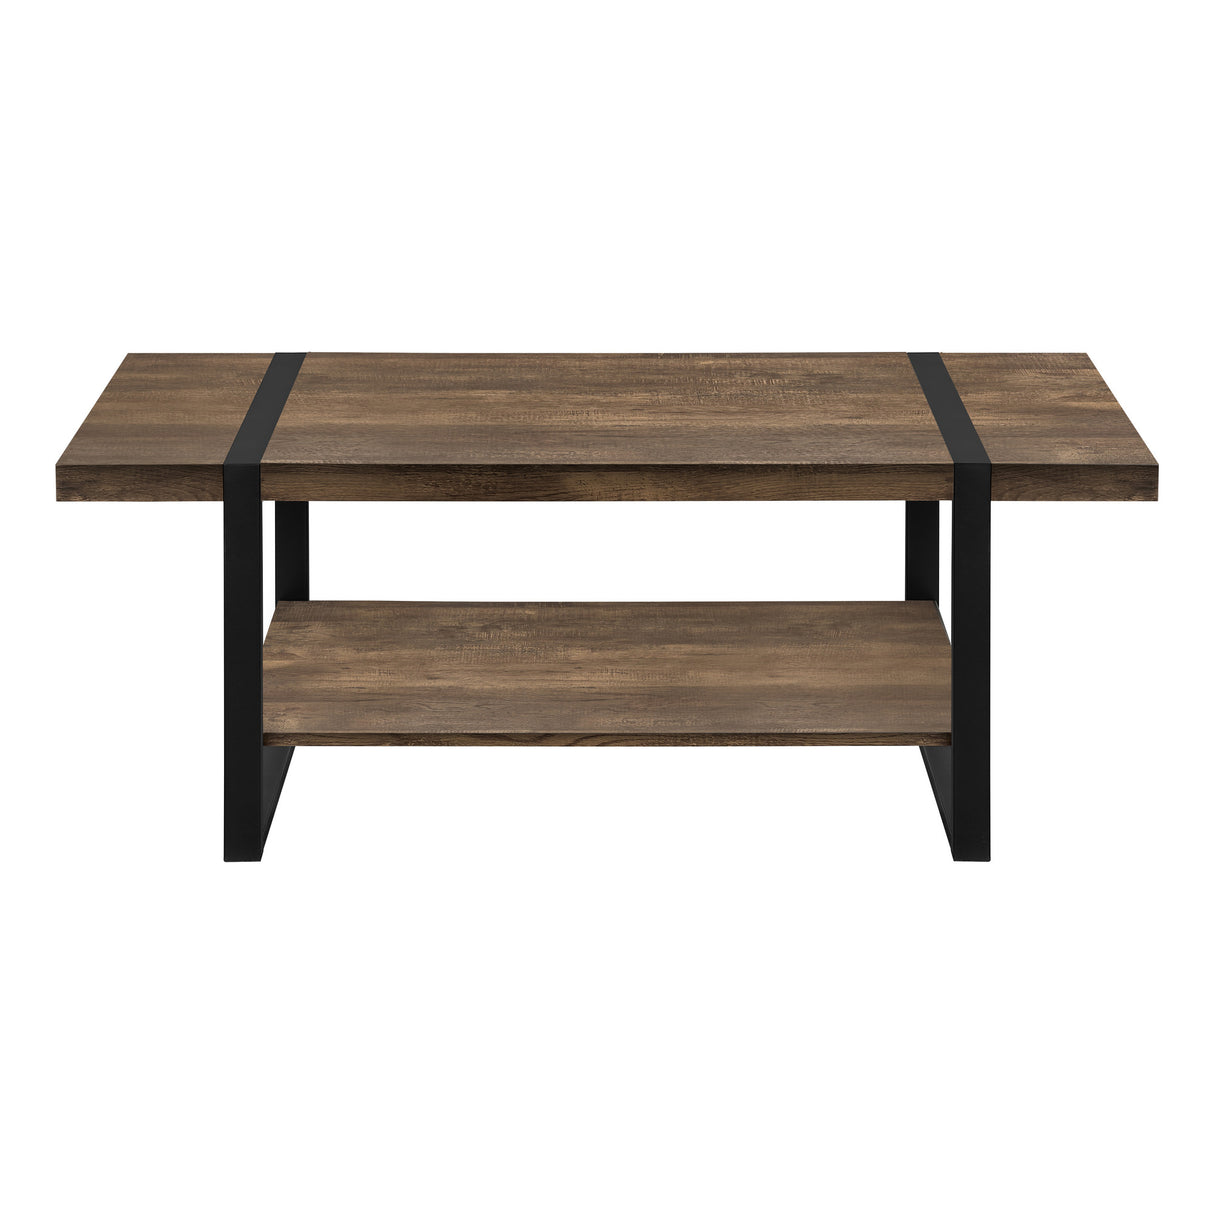 47" Brown And Black Rectangular Coffee Table With Shelf